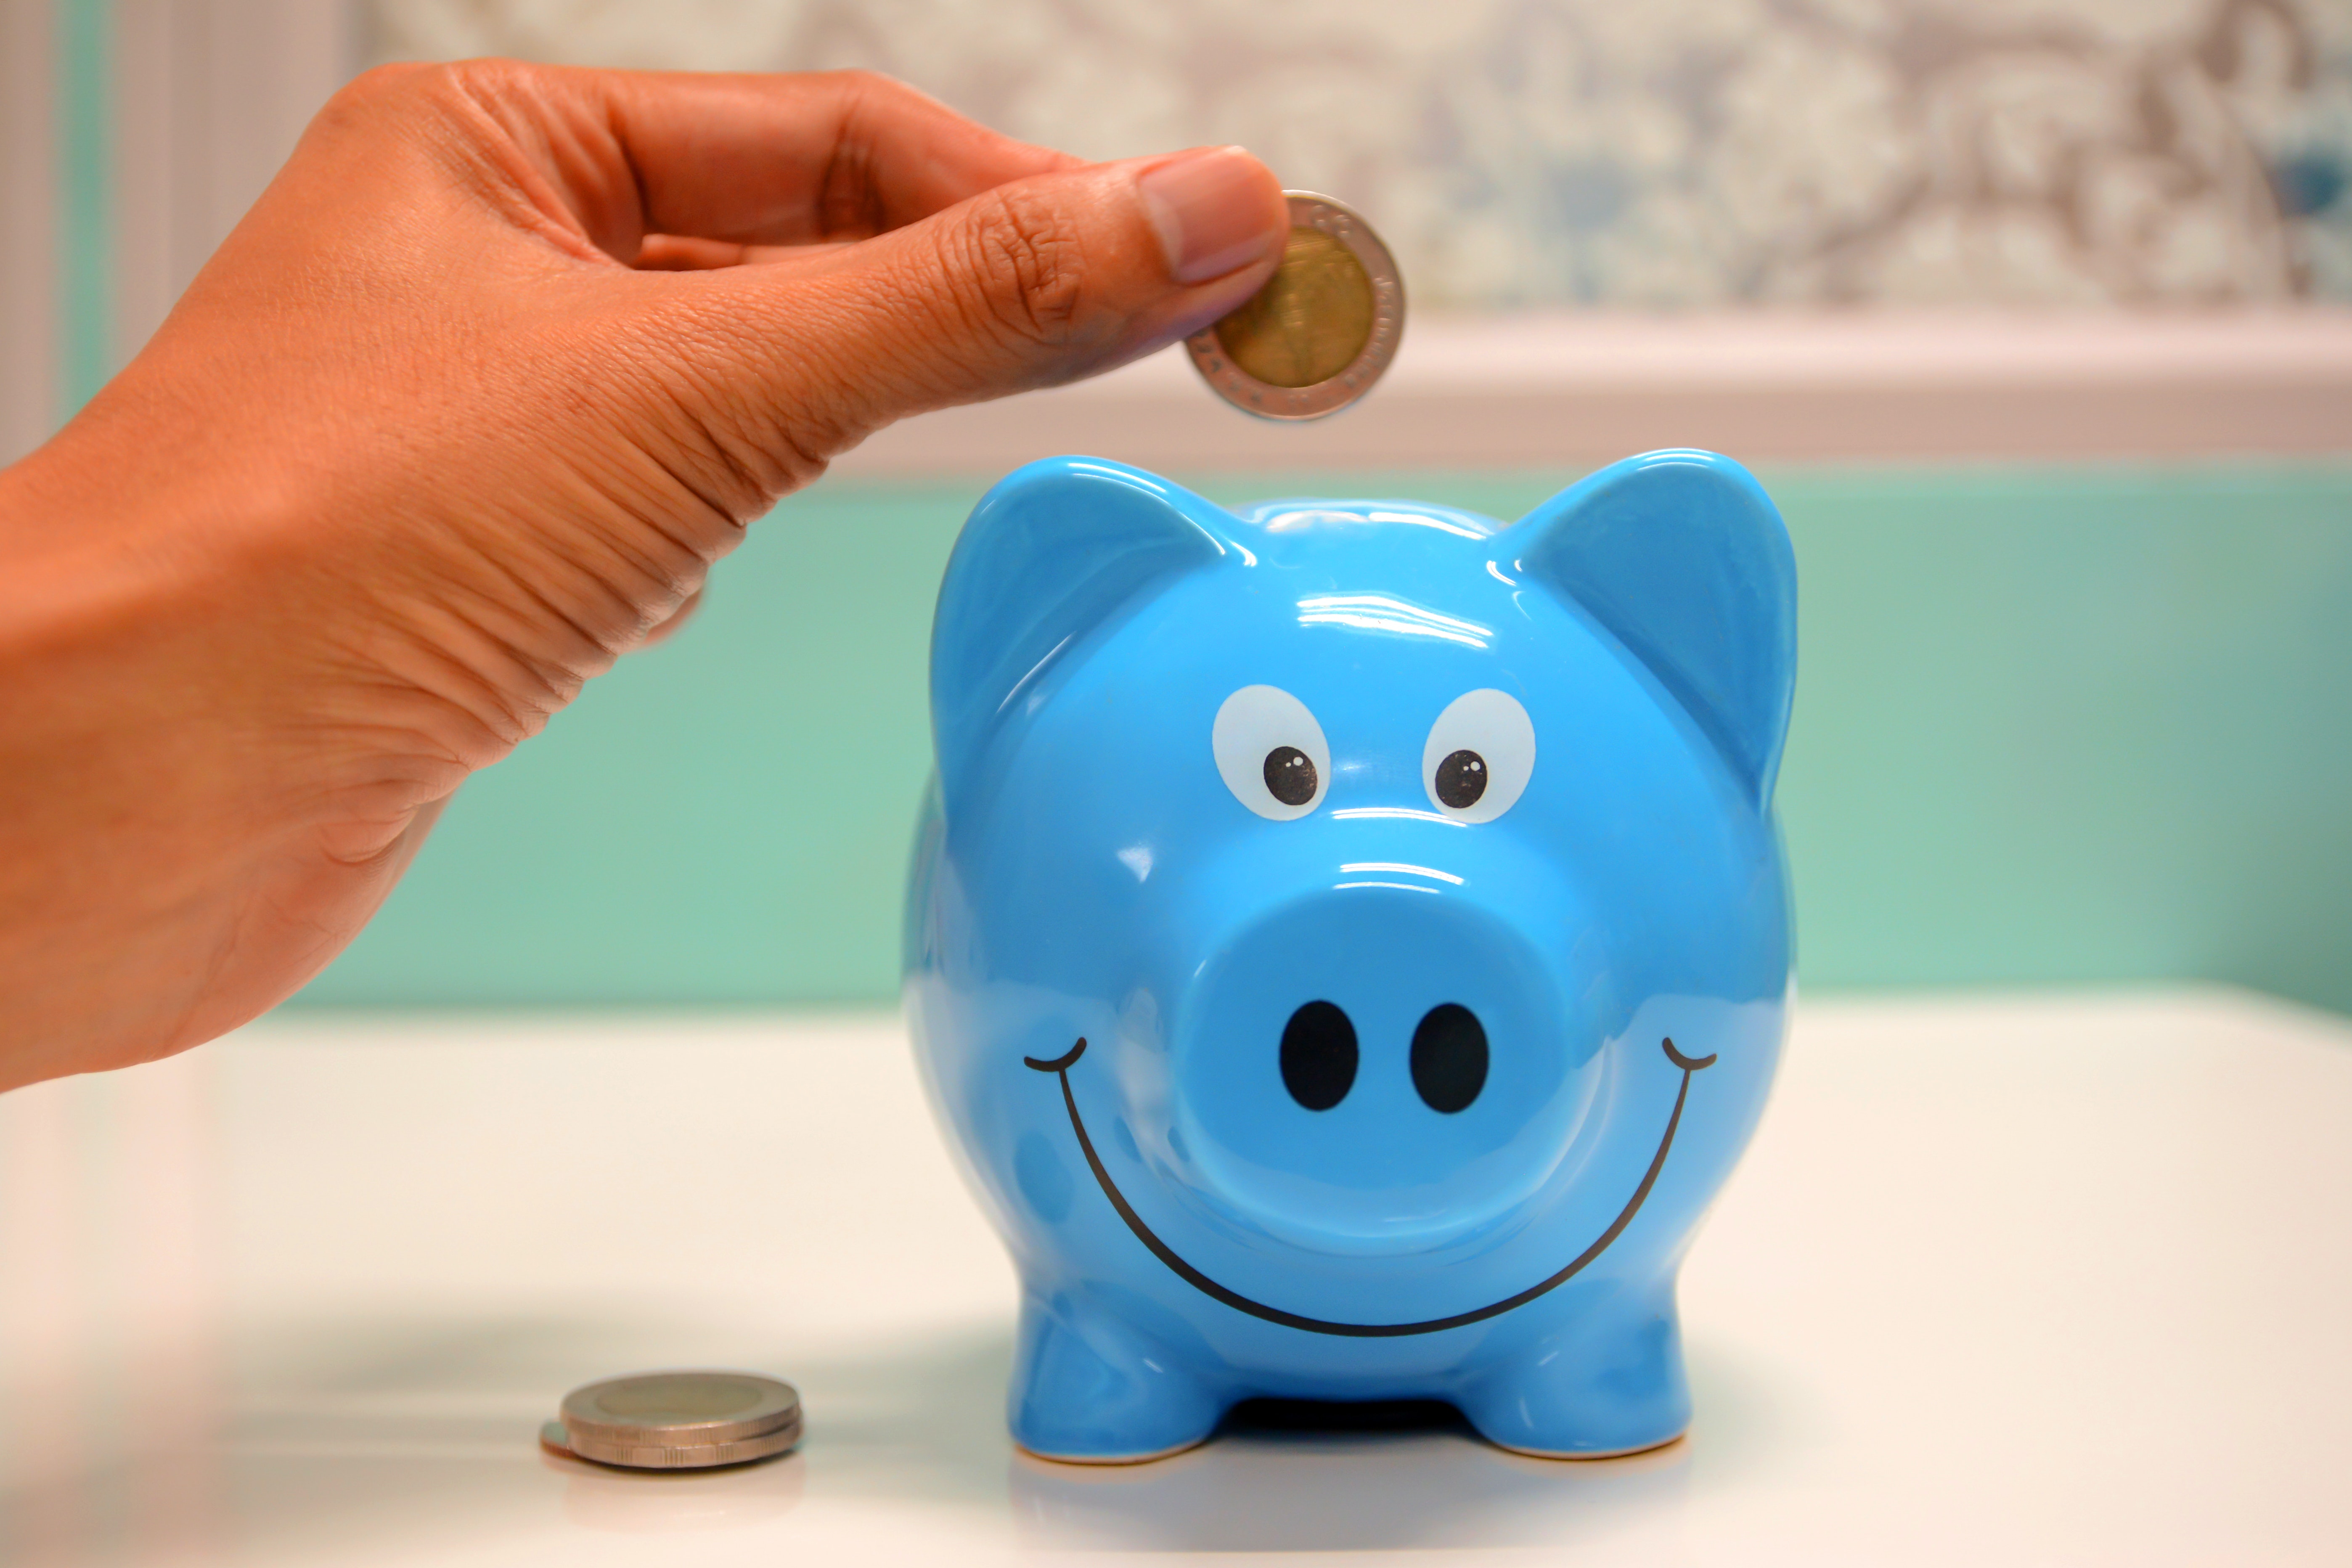 Putting money in a piggy bank to save up for teeth whitening